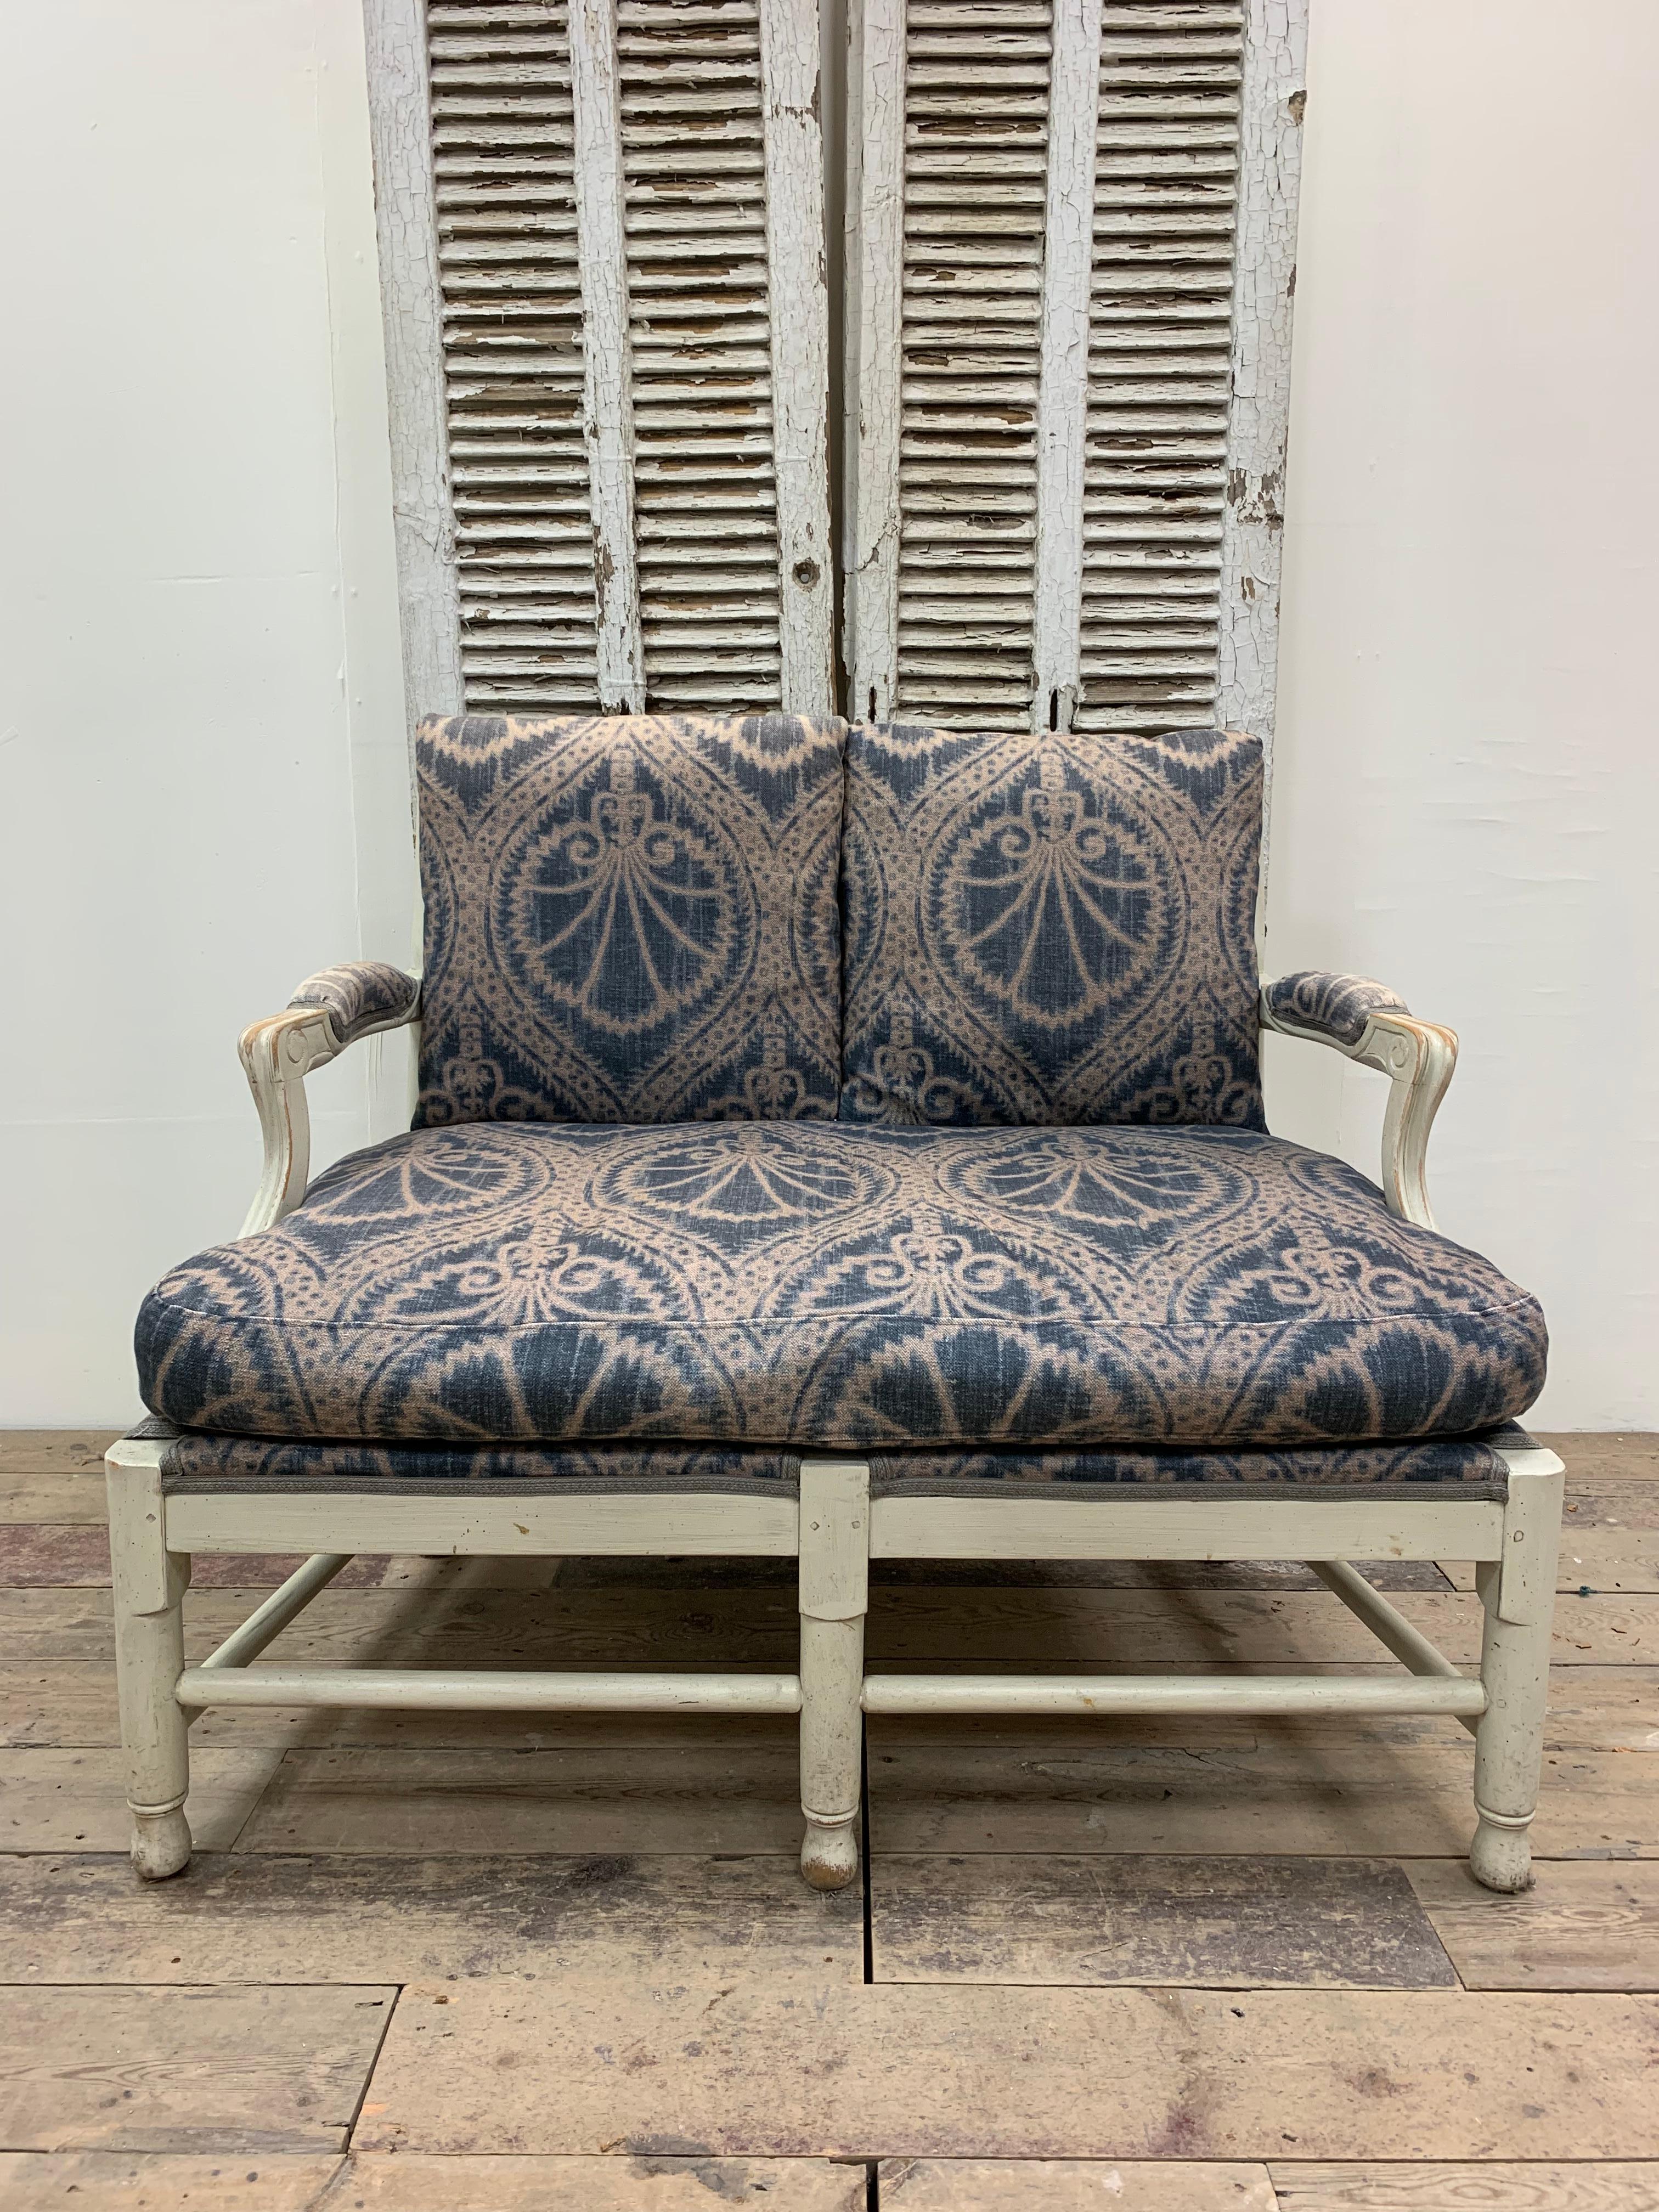 This famous Gripsholm model was originally designed in the late 1800s with this version dating to around the 1950s.  
A very sturdy and classic design with its traditional ladder-back.  The sofa has four loose upholstered cushions that can be